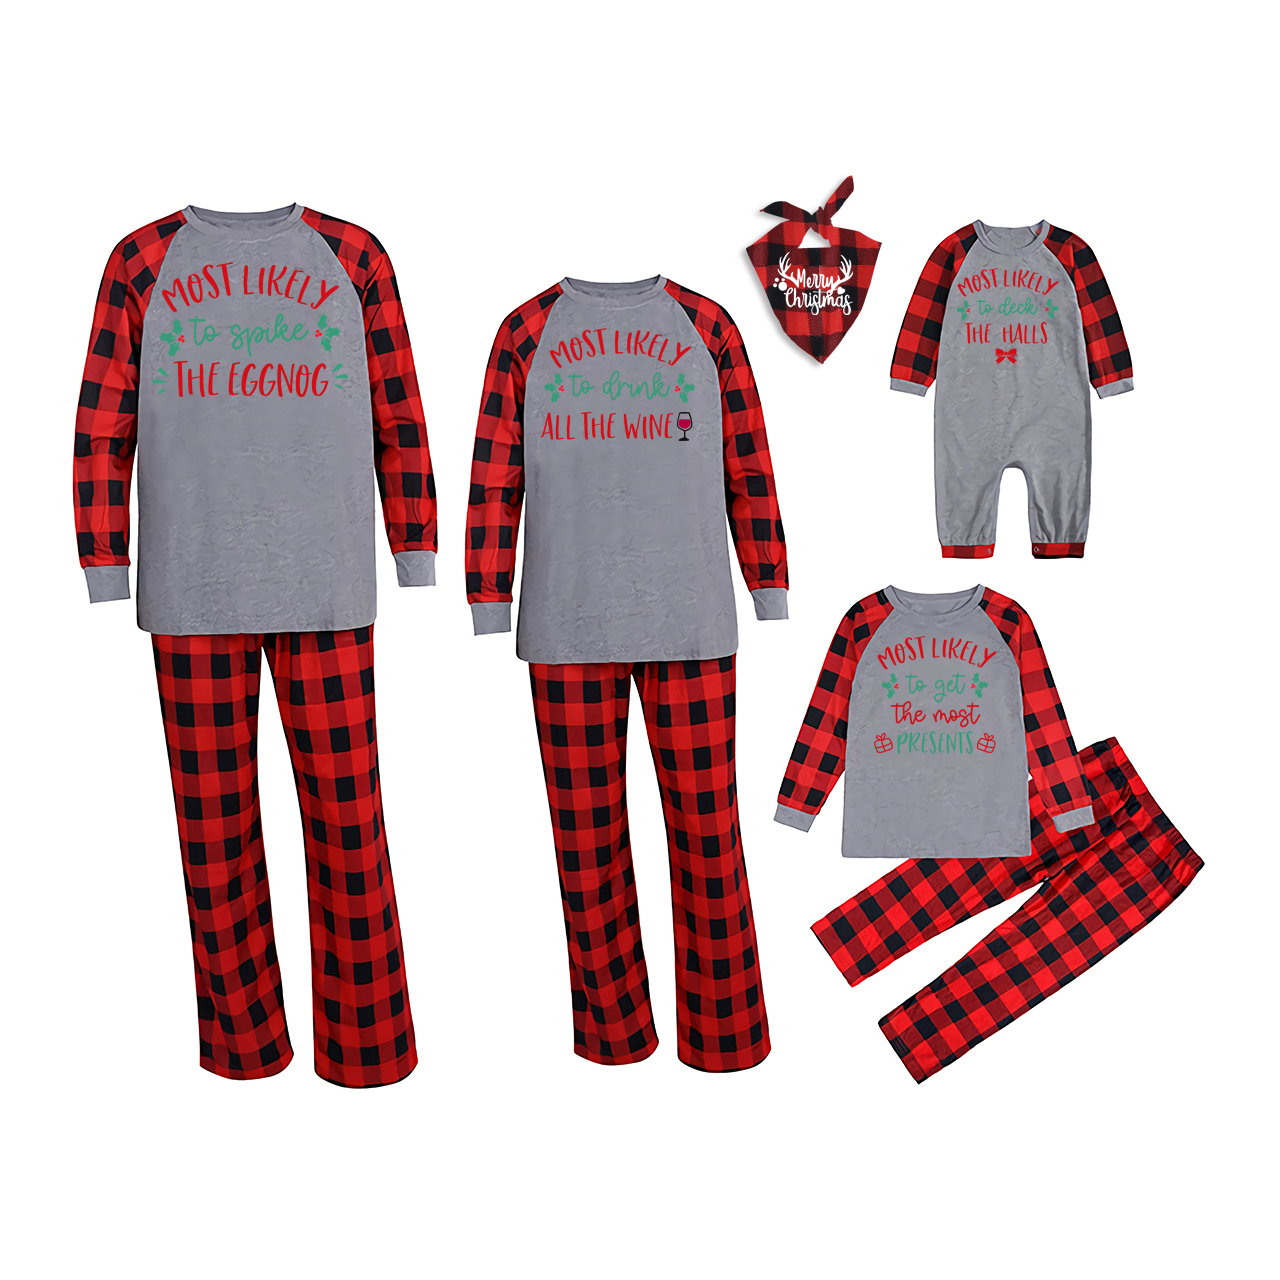 Most Likely Leaves Christmas Family Matching Pajamas